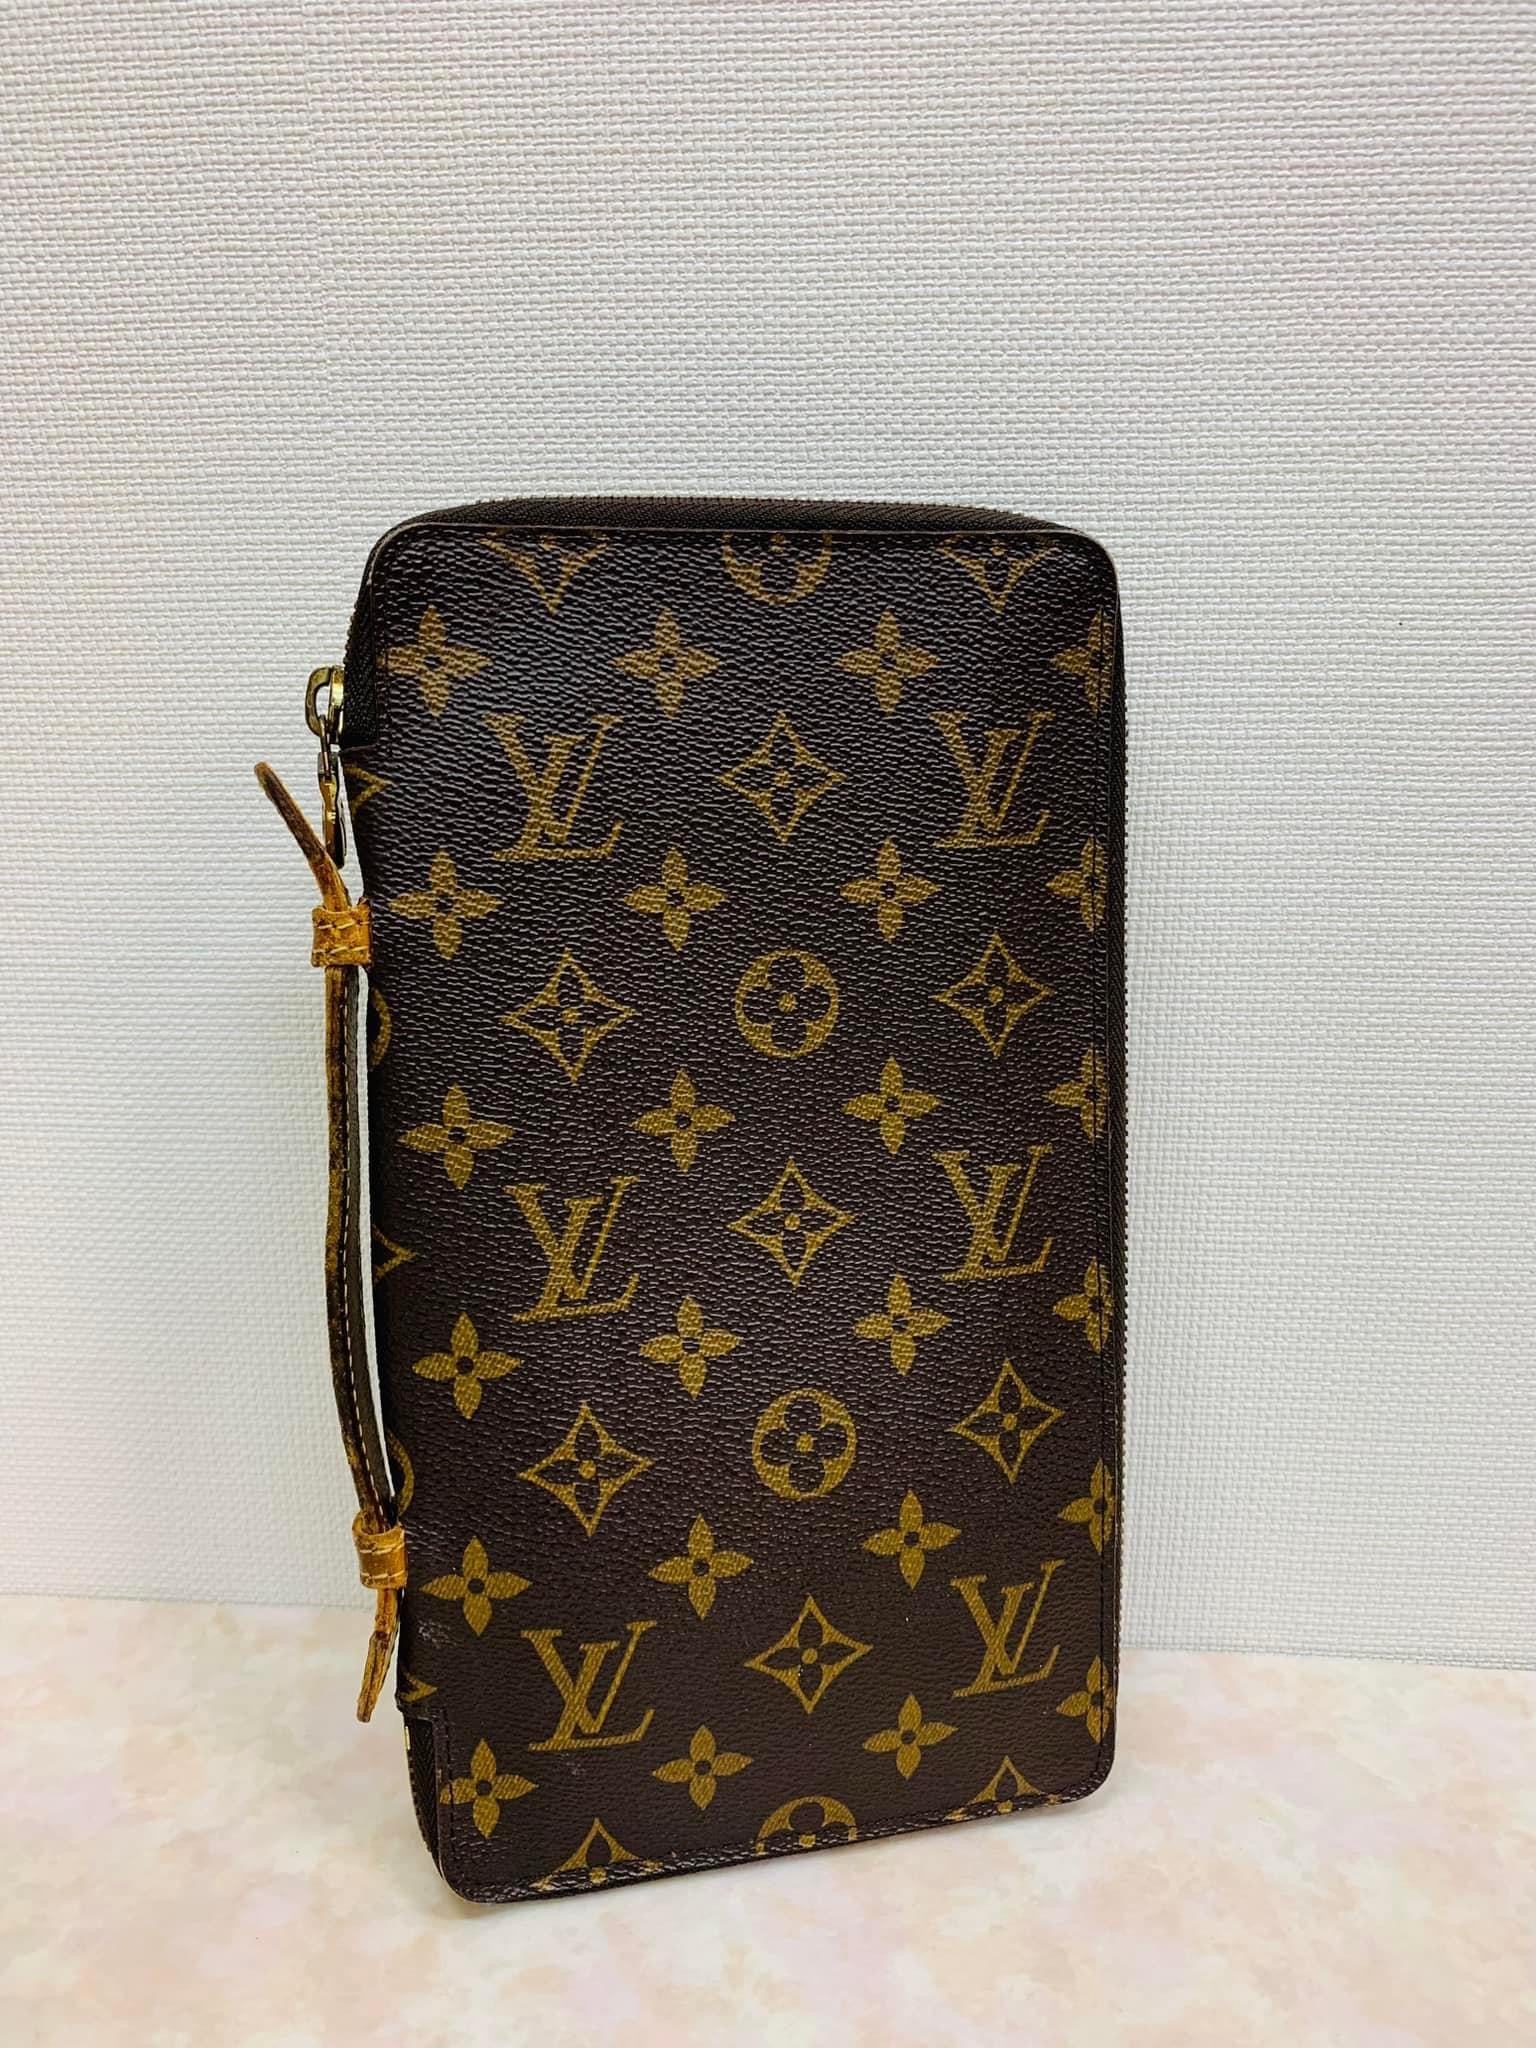 Lv Or Other High End 'travel Organizer